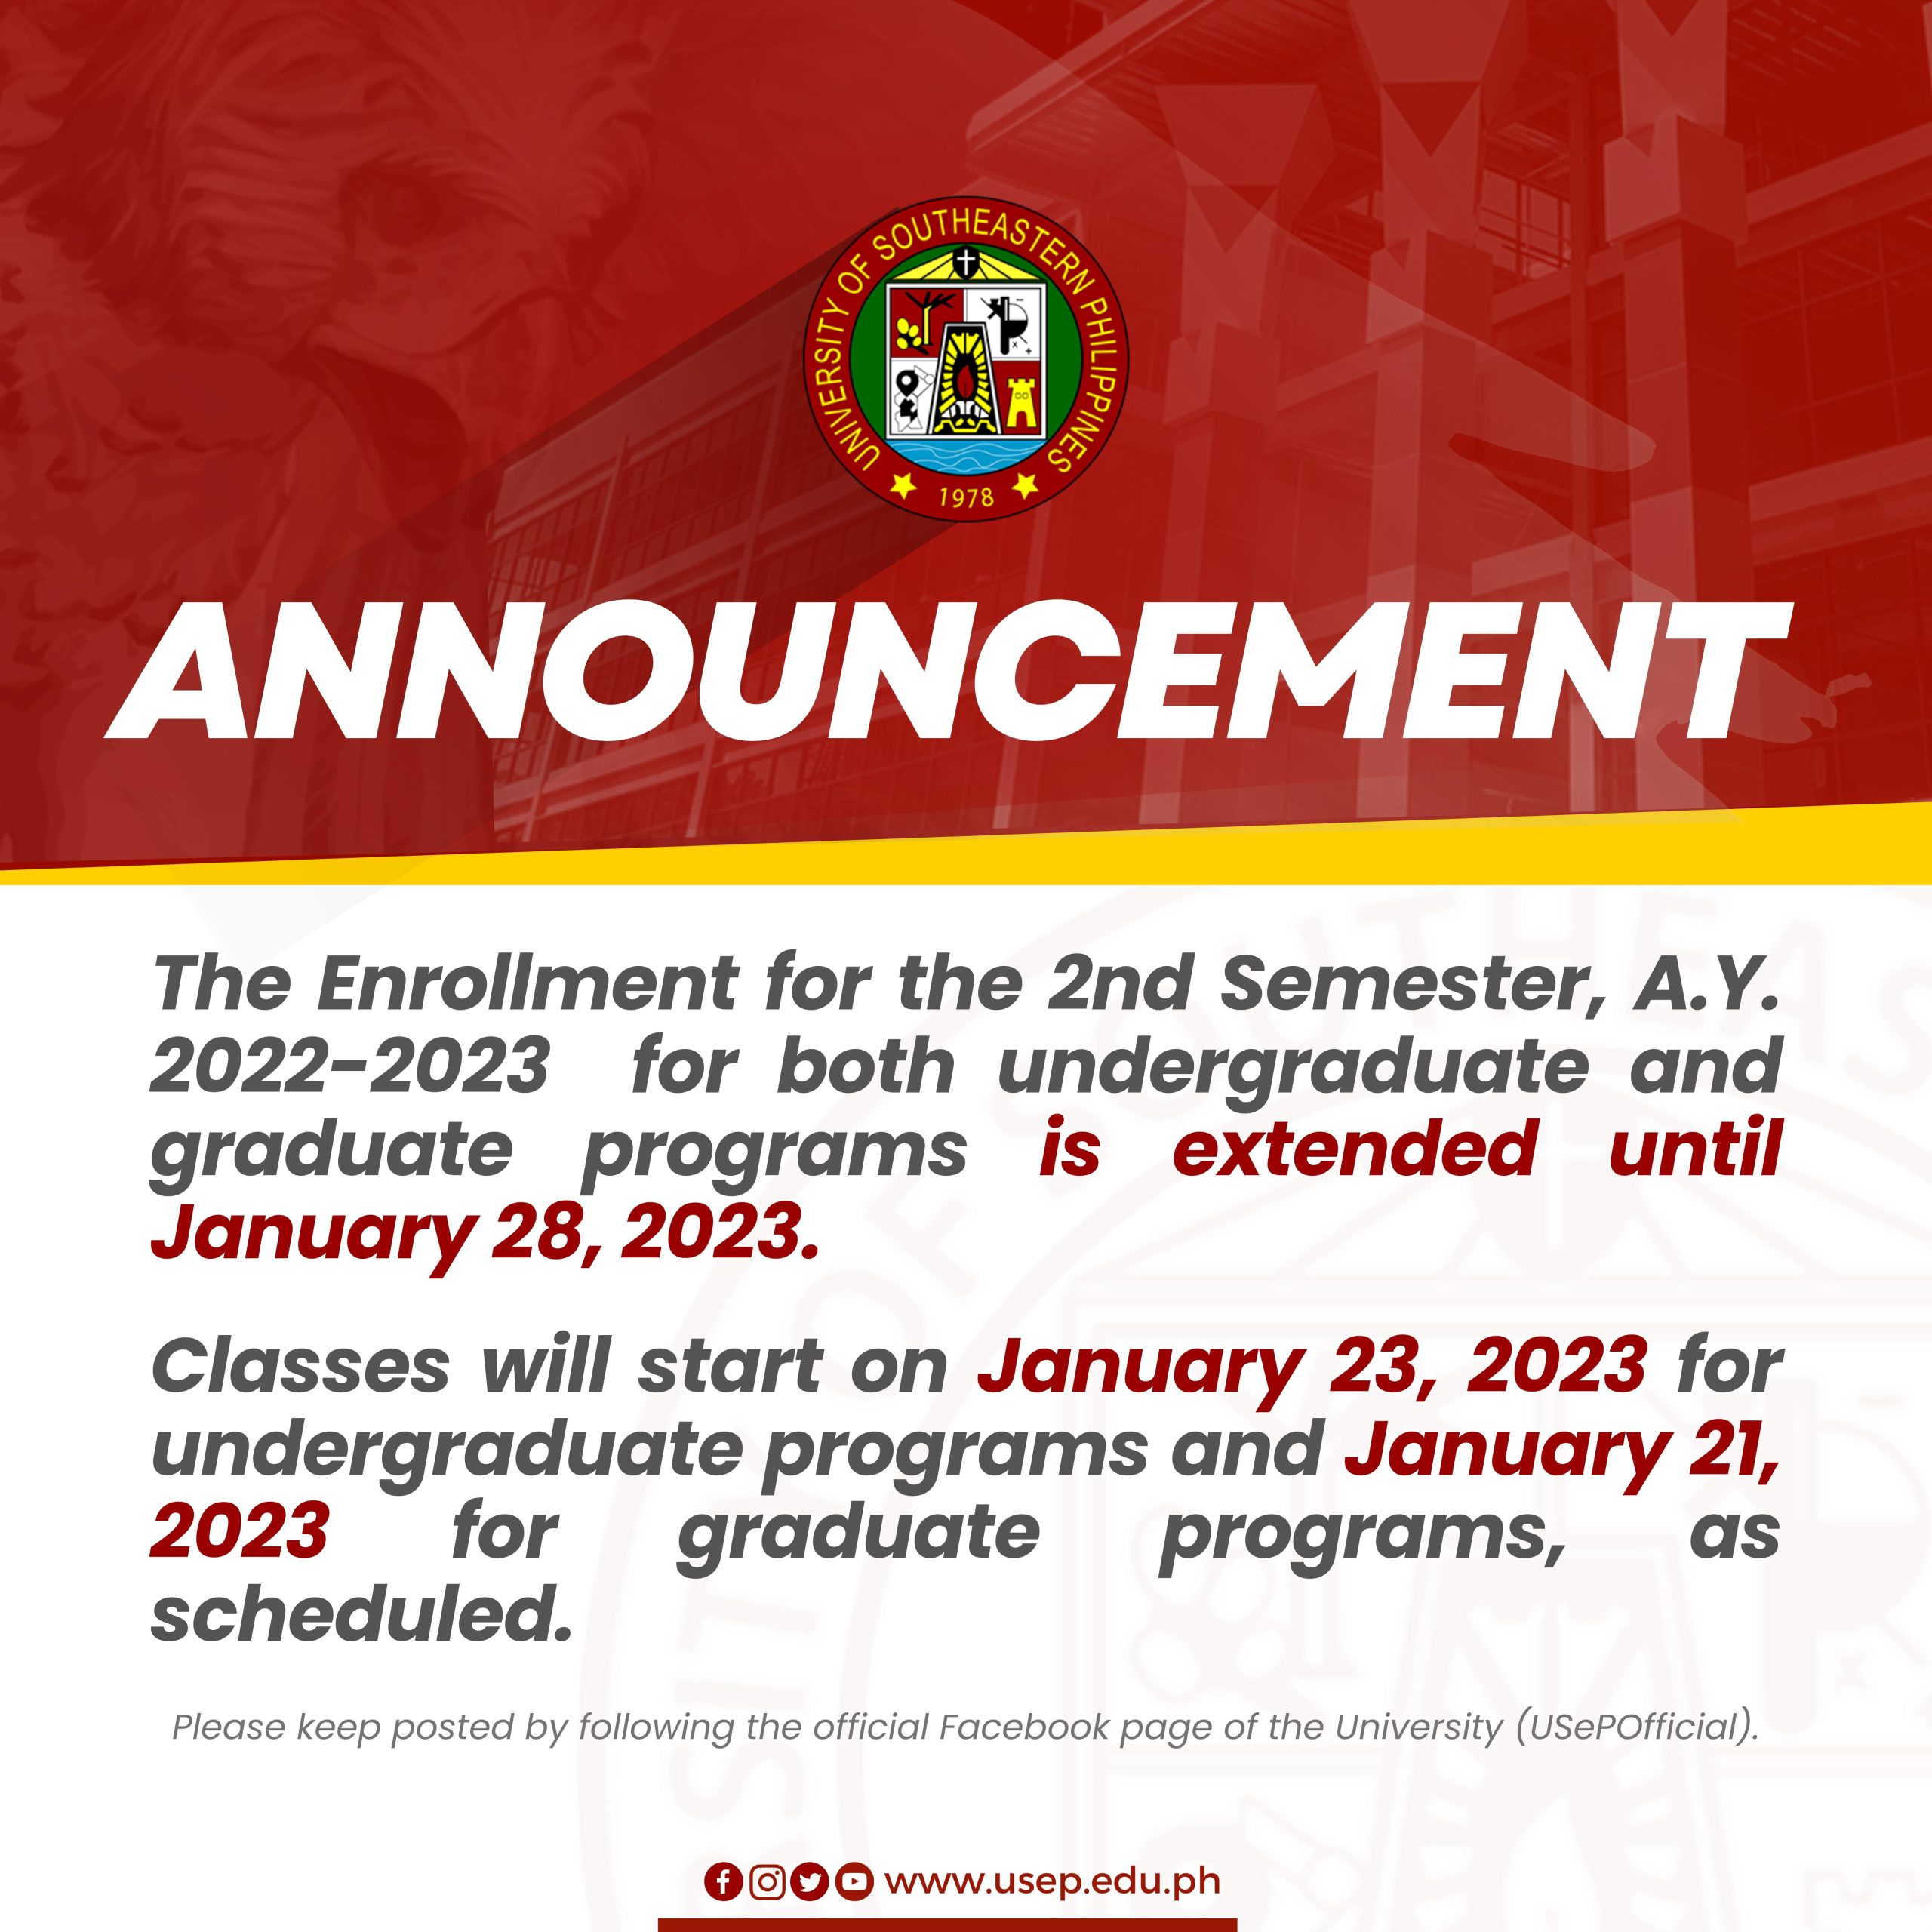 Extension of the Enrollment for the 2nd Semester, A.Y. 2022-2023